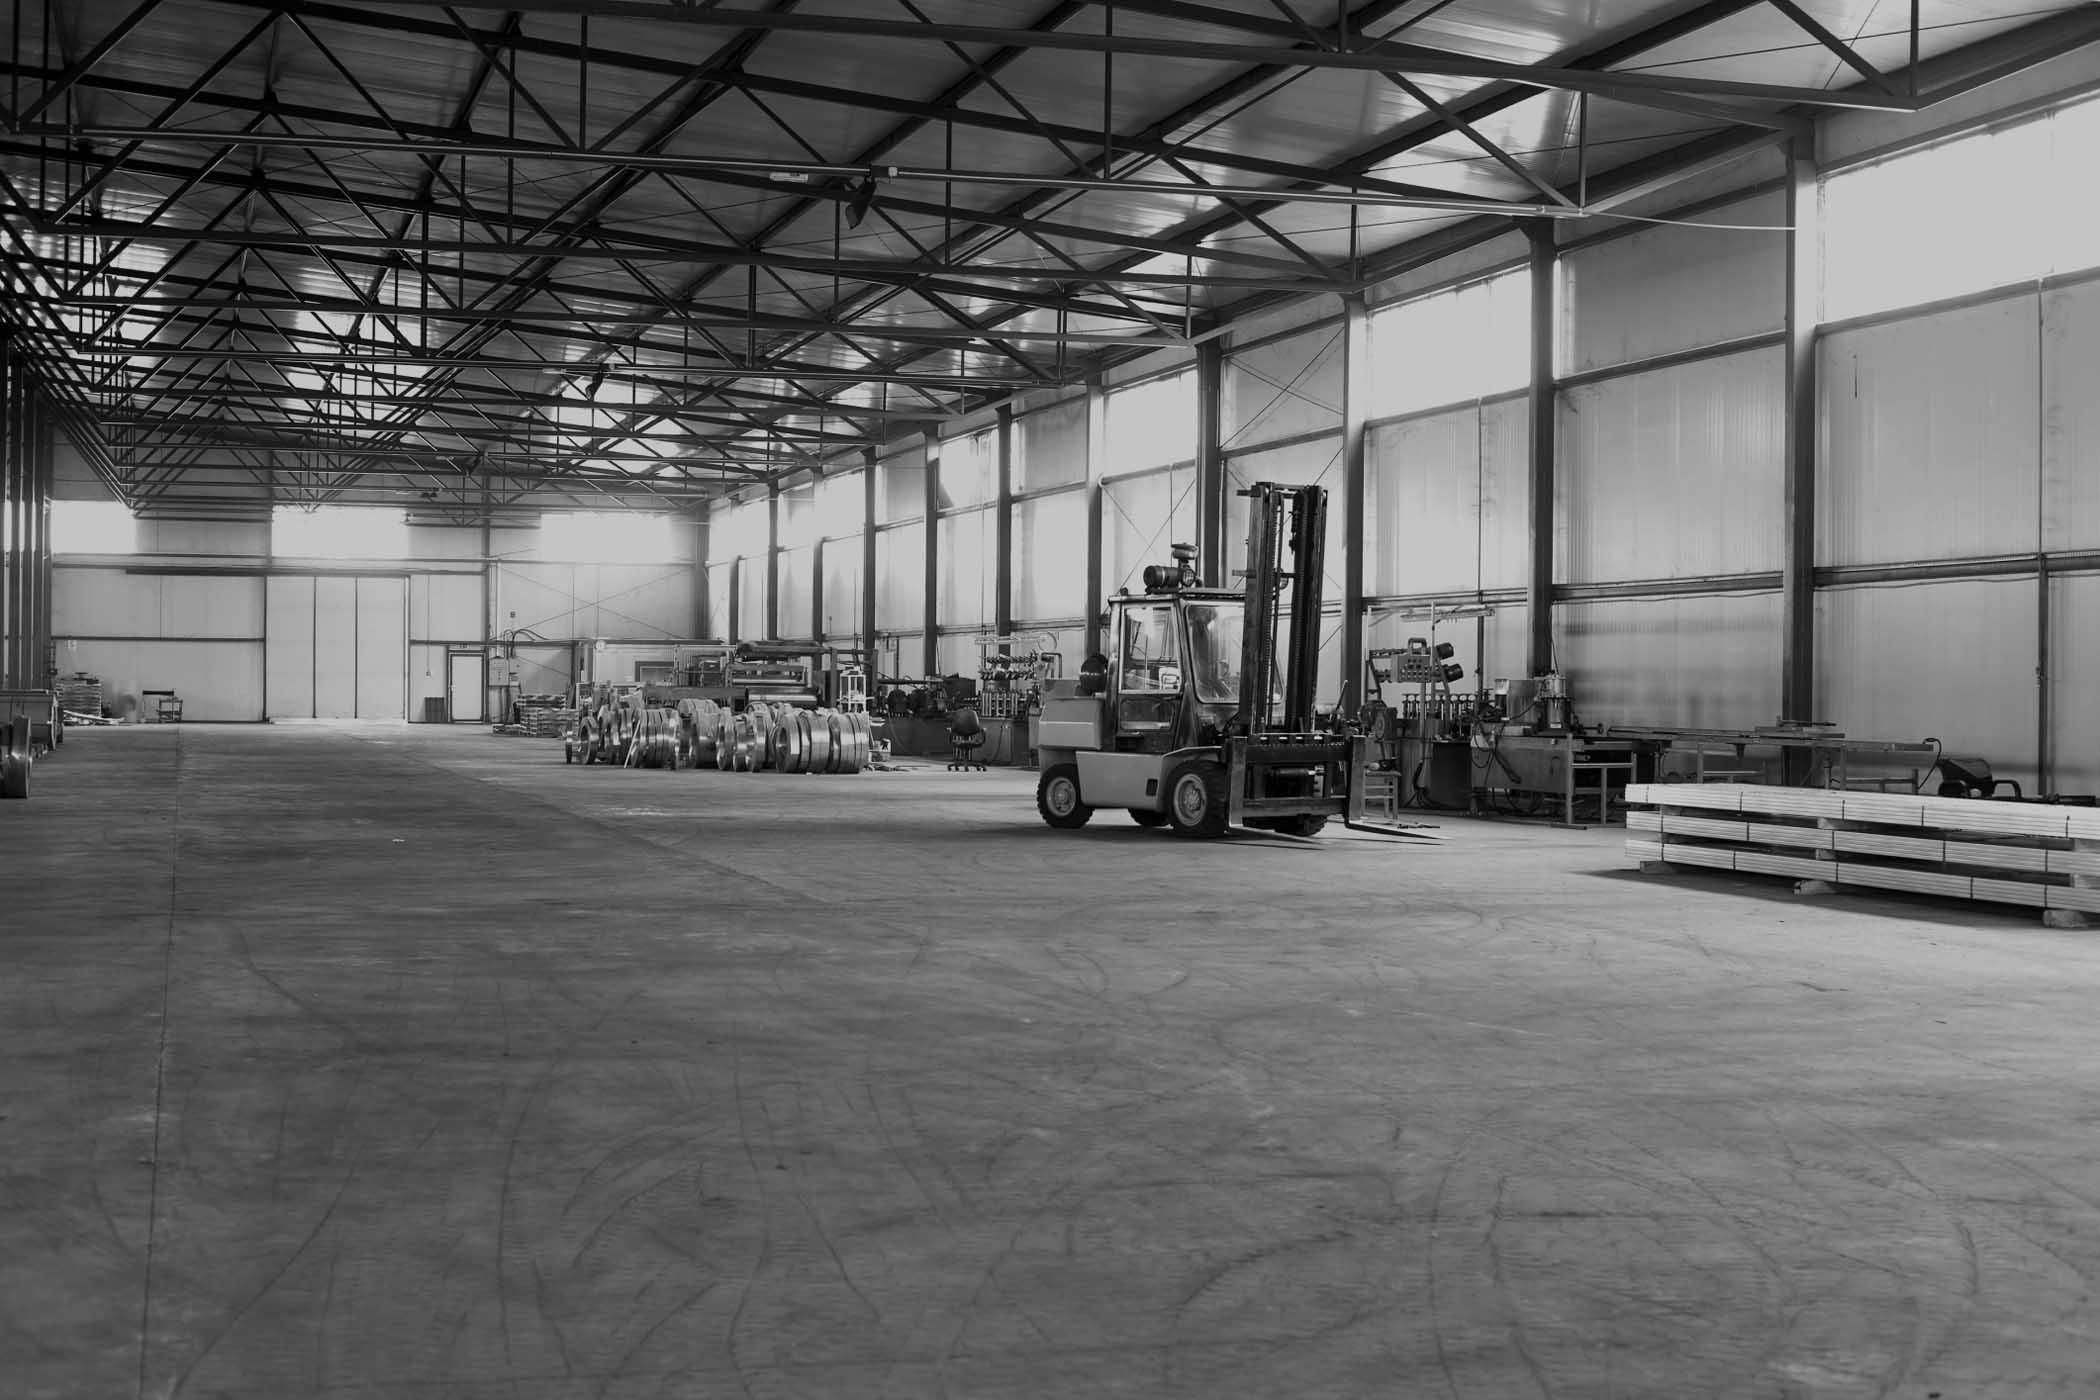 Grayscale photo of a factory plant floor